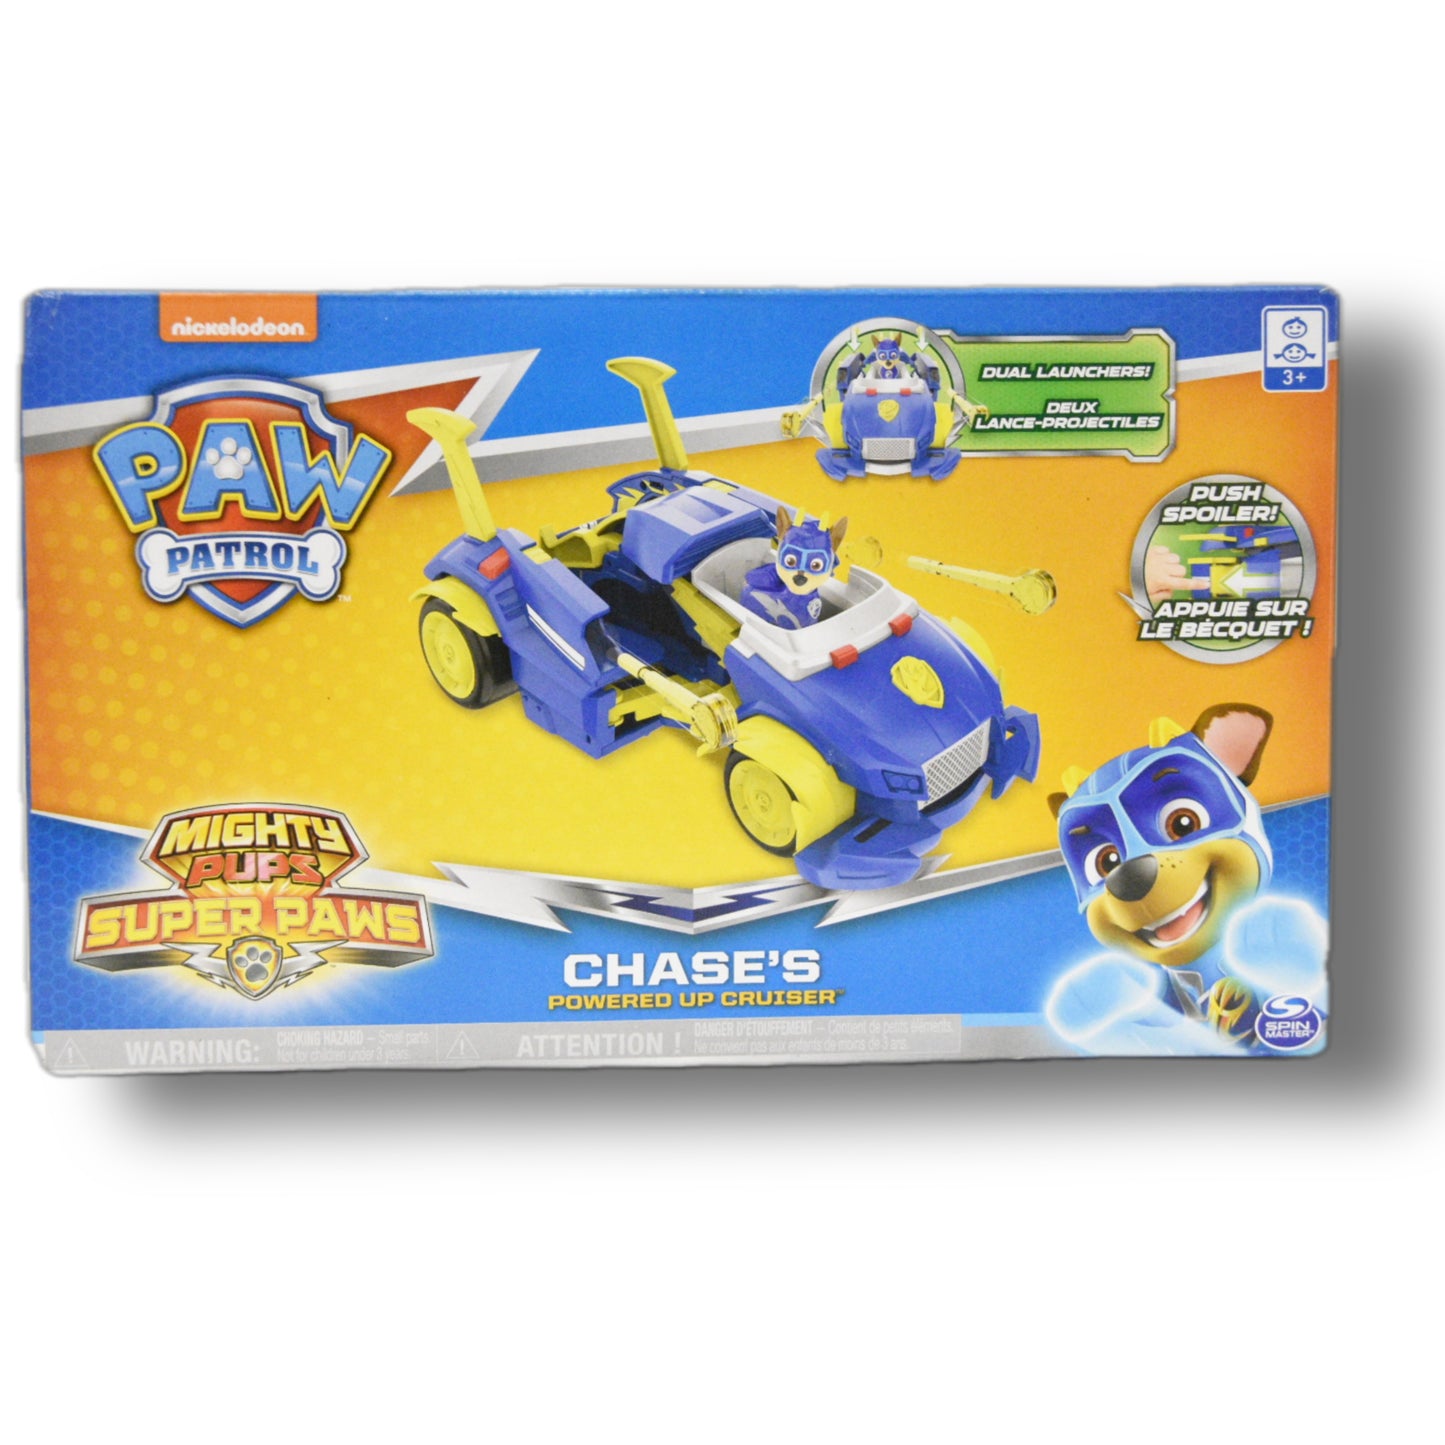 Paw Patrol Chase’s Powered up Cruiser